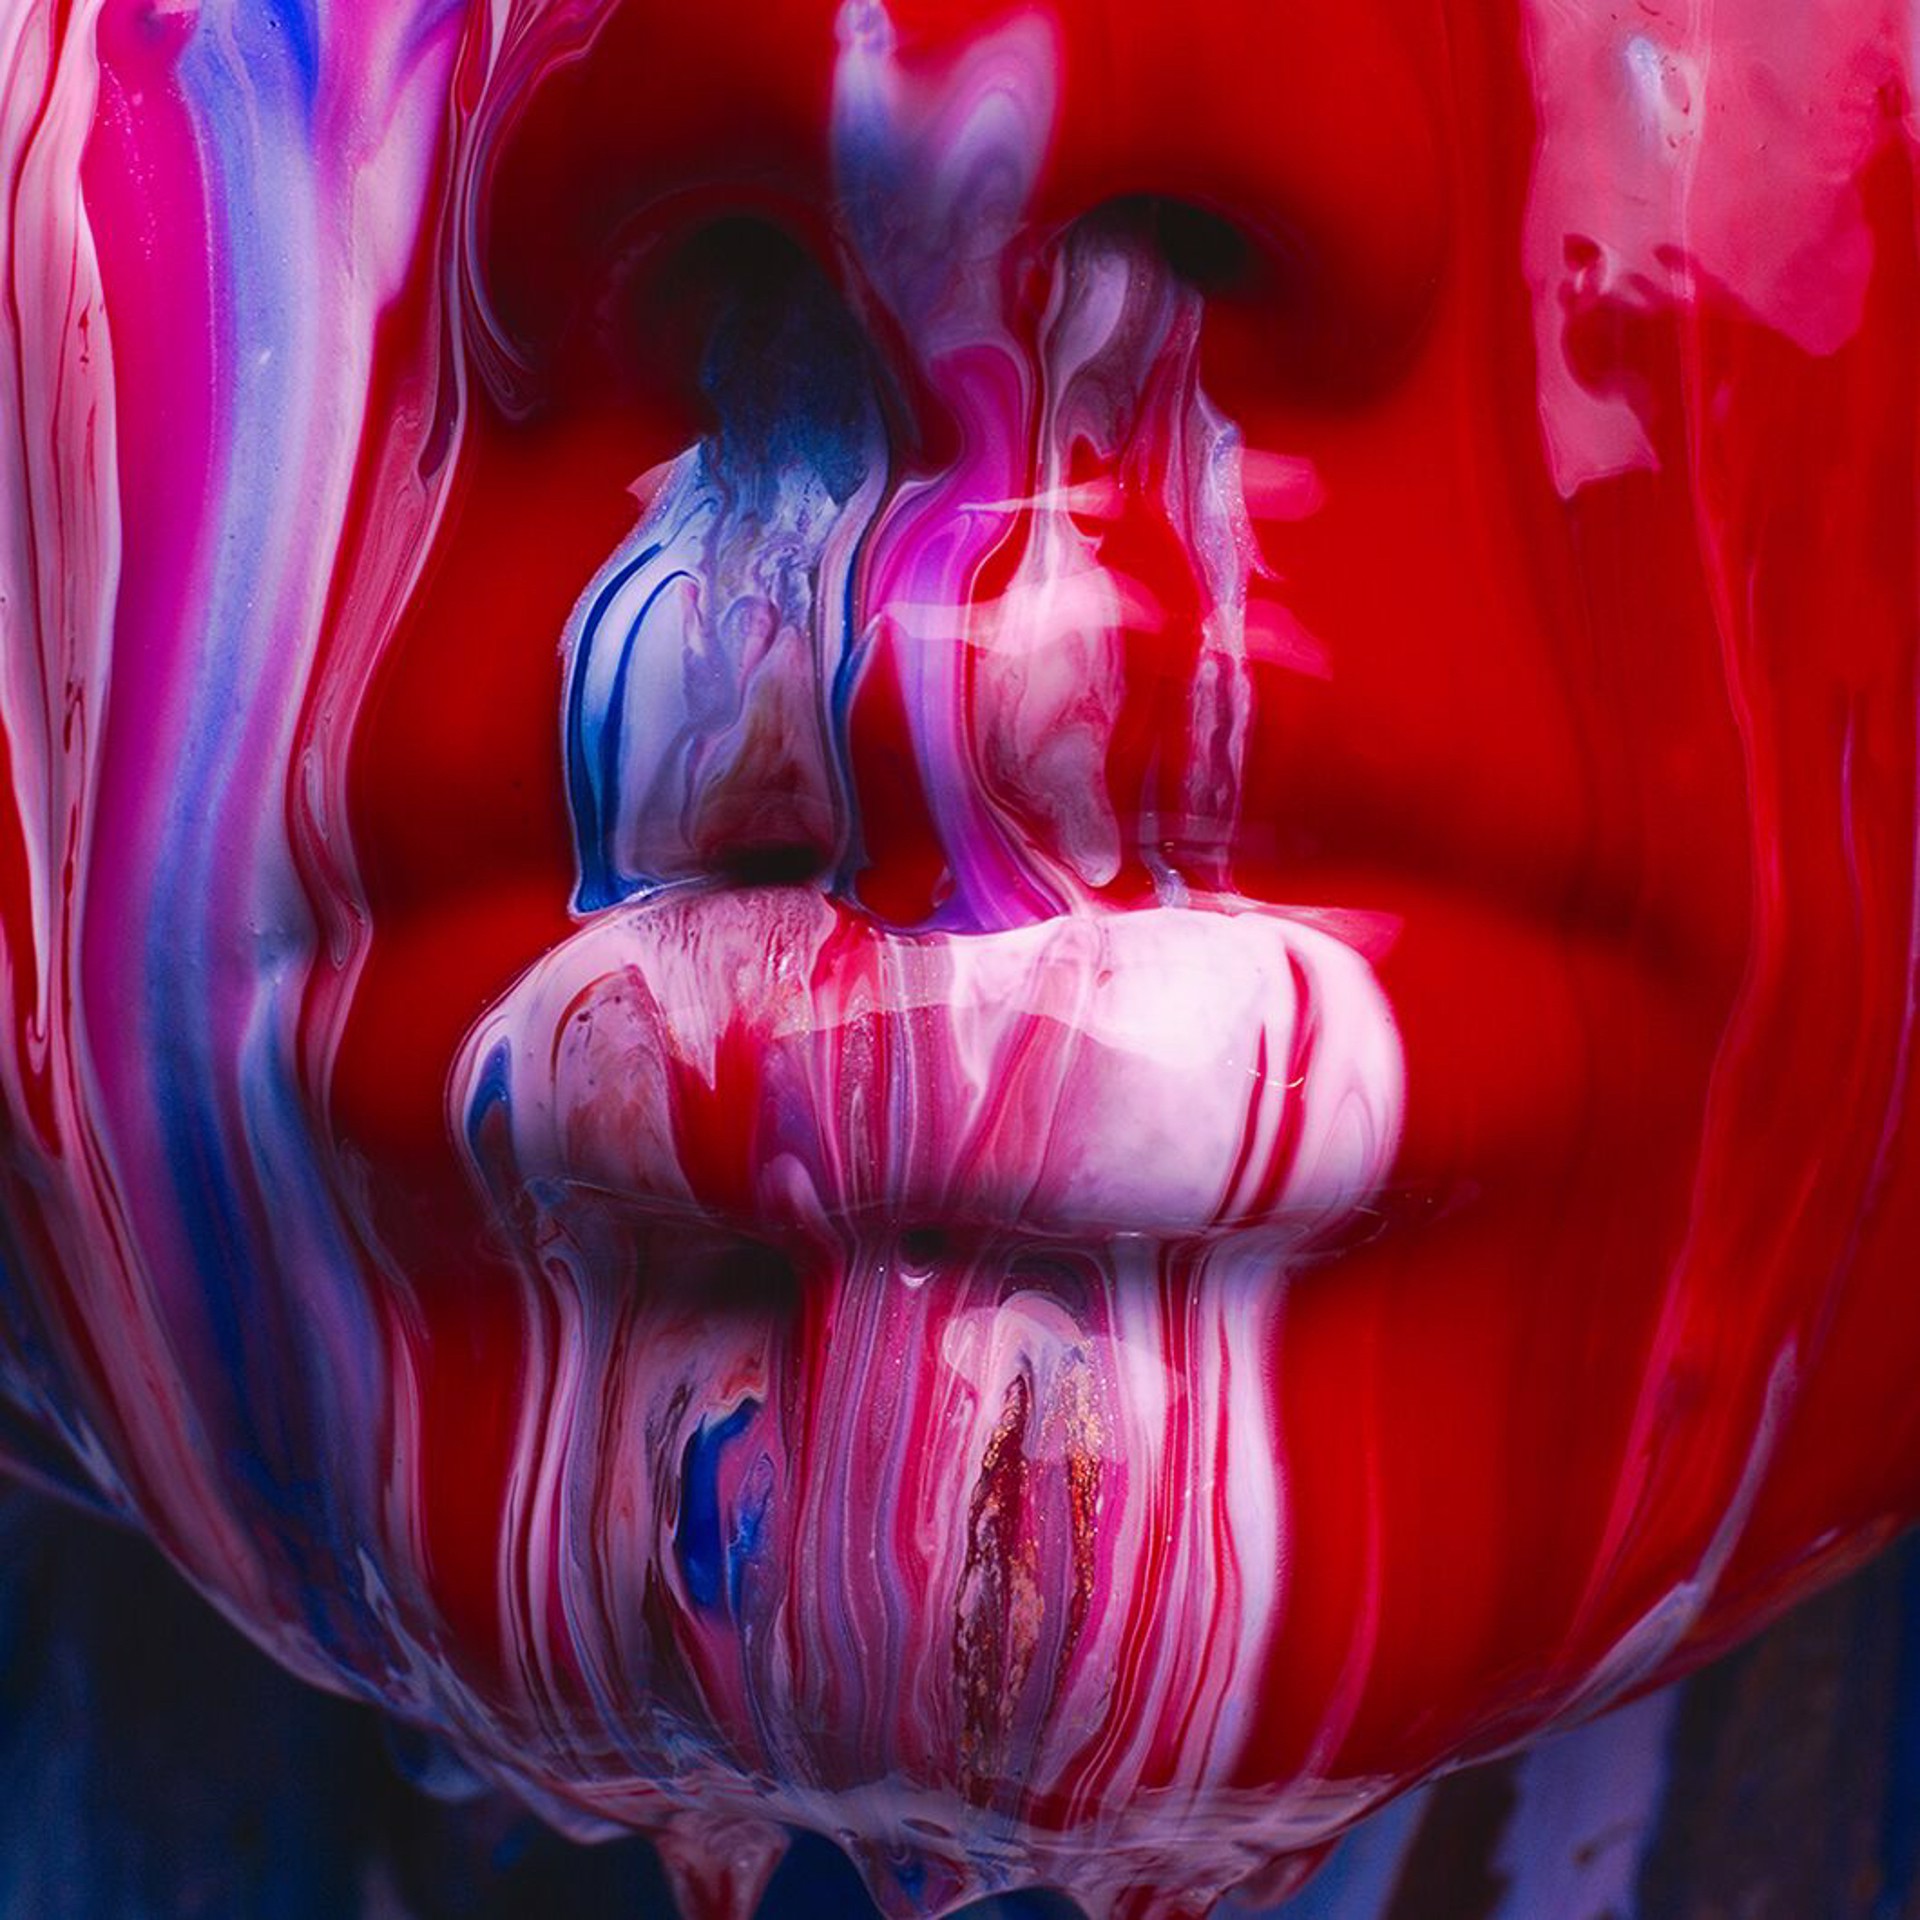 High Gloss Mouth by Tyler Shields